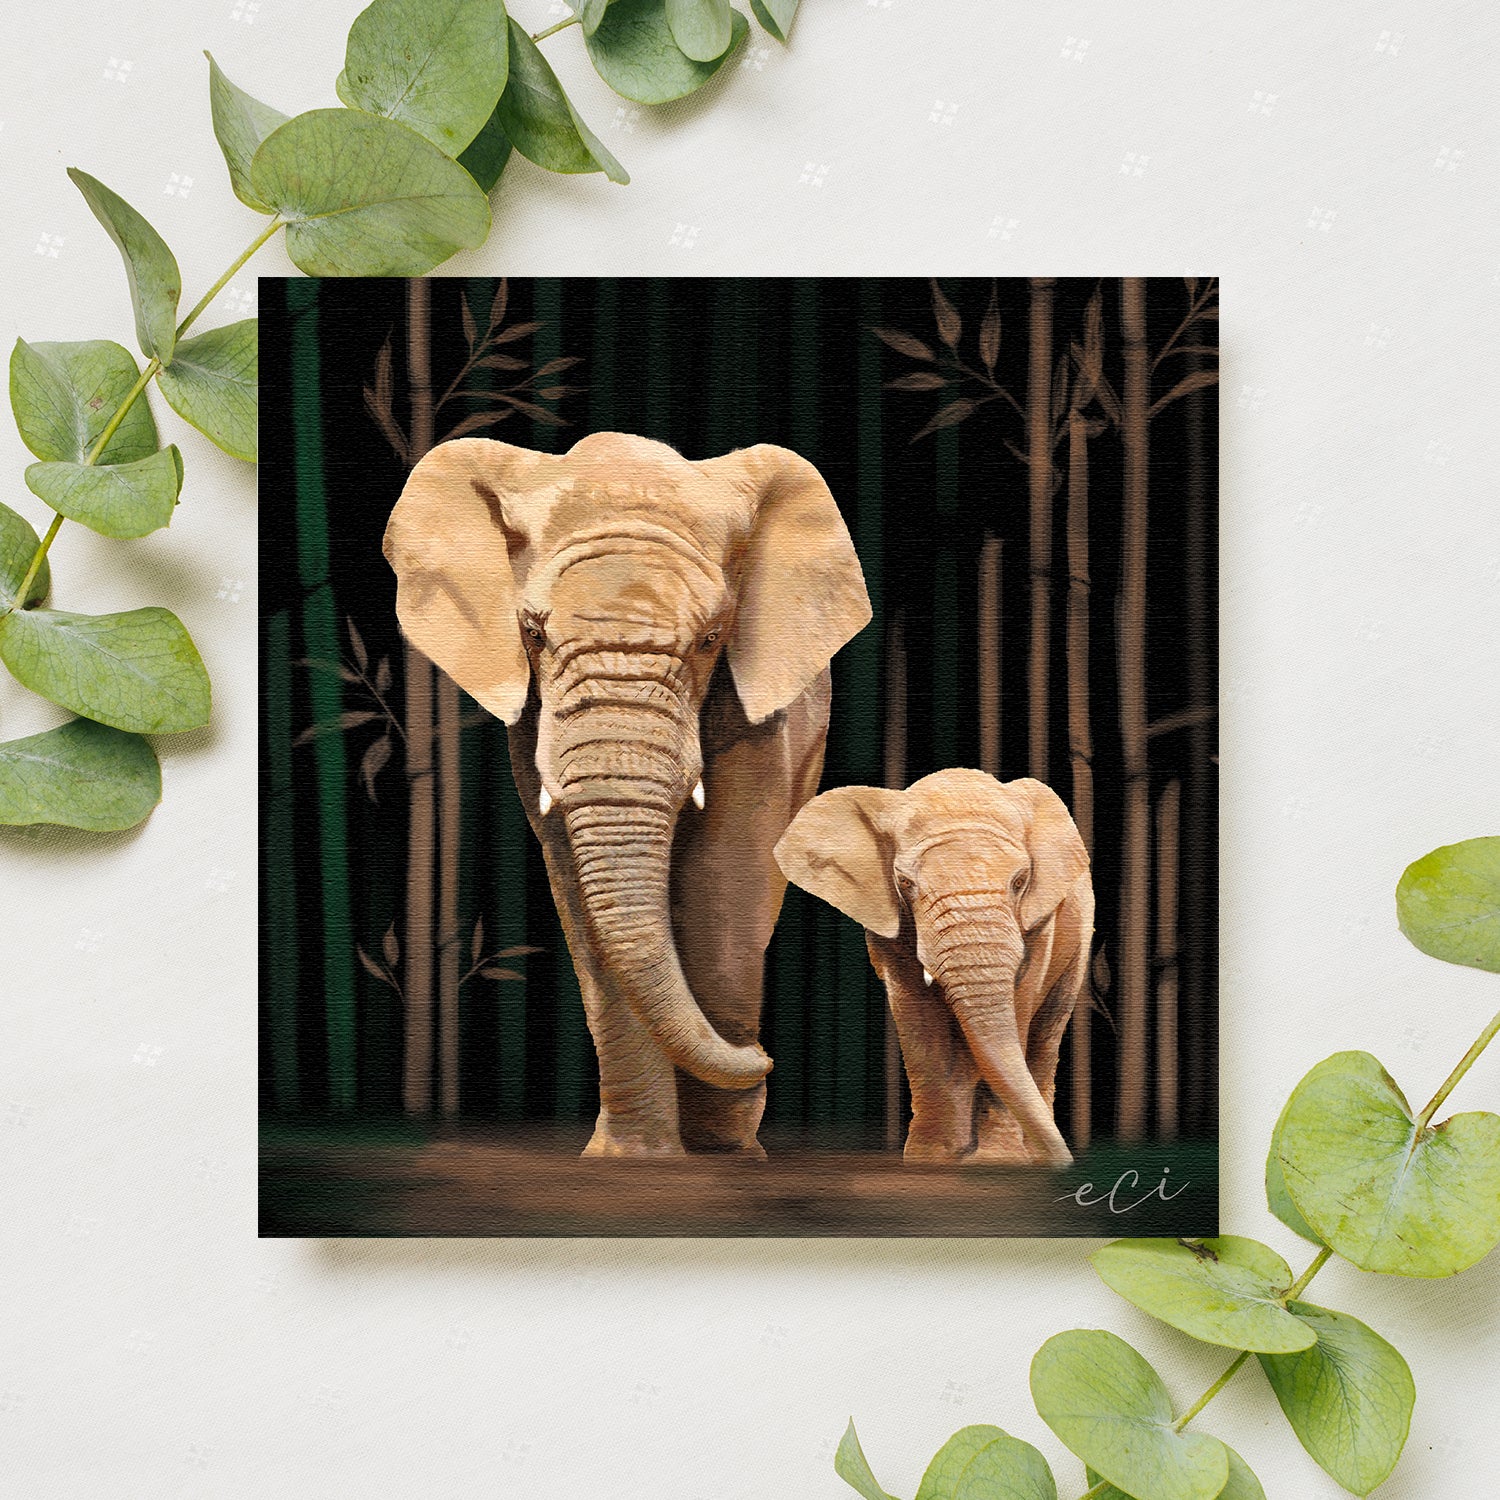 Elephant With Baby Elephant Canvas Painting Digital Printed Animal Wall Art 2